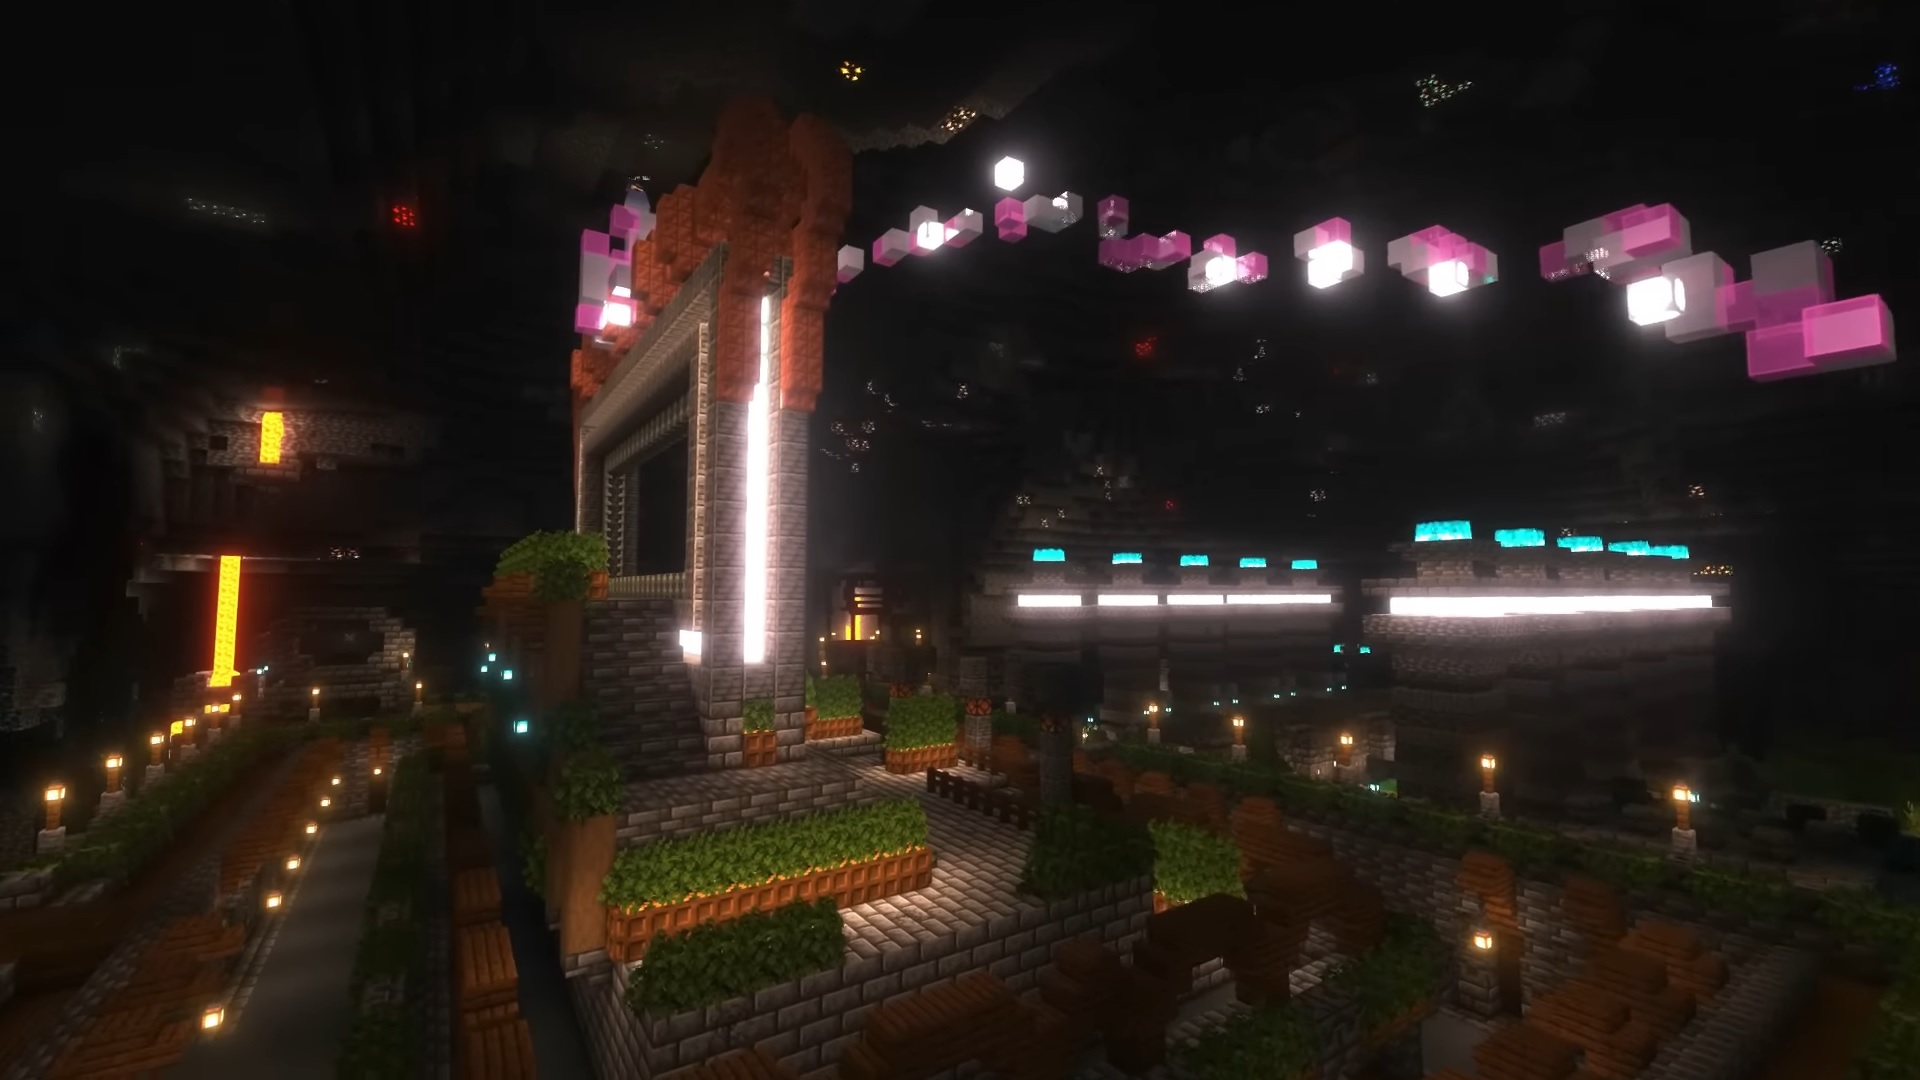 Minecraft ancient city build - A large central portal surrounded by light blocks, with stained glass and sea lamps on top, surrounded by greenery.